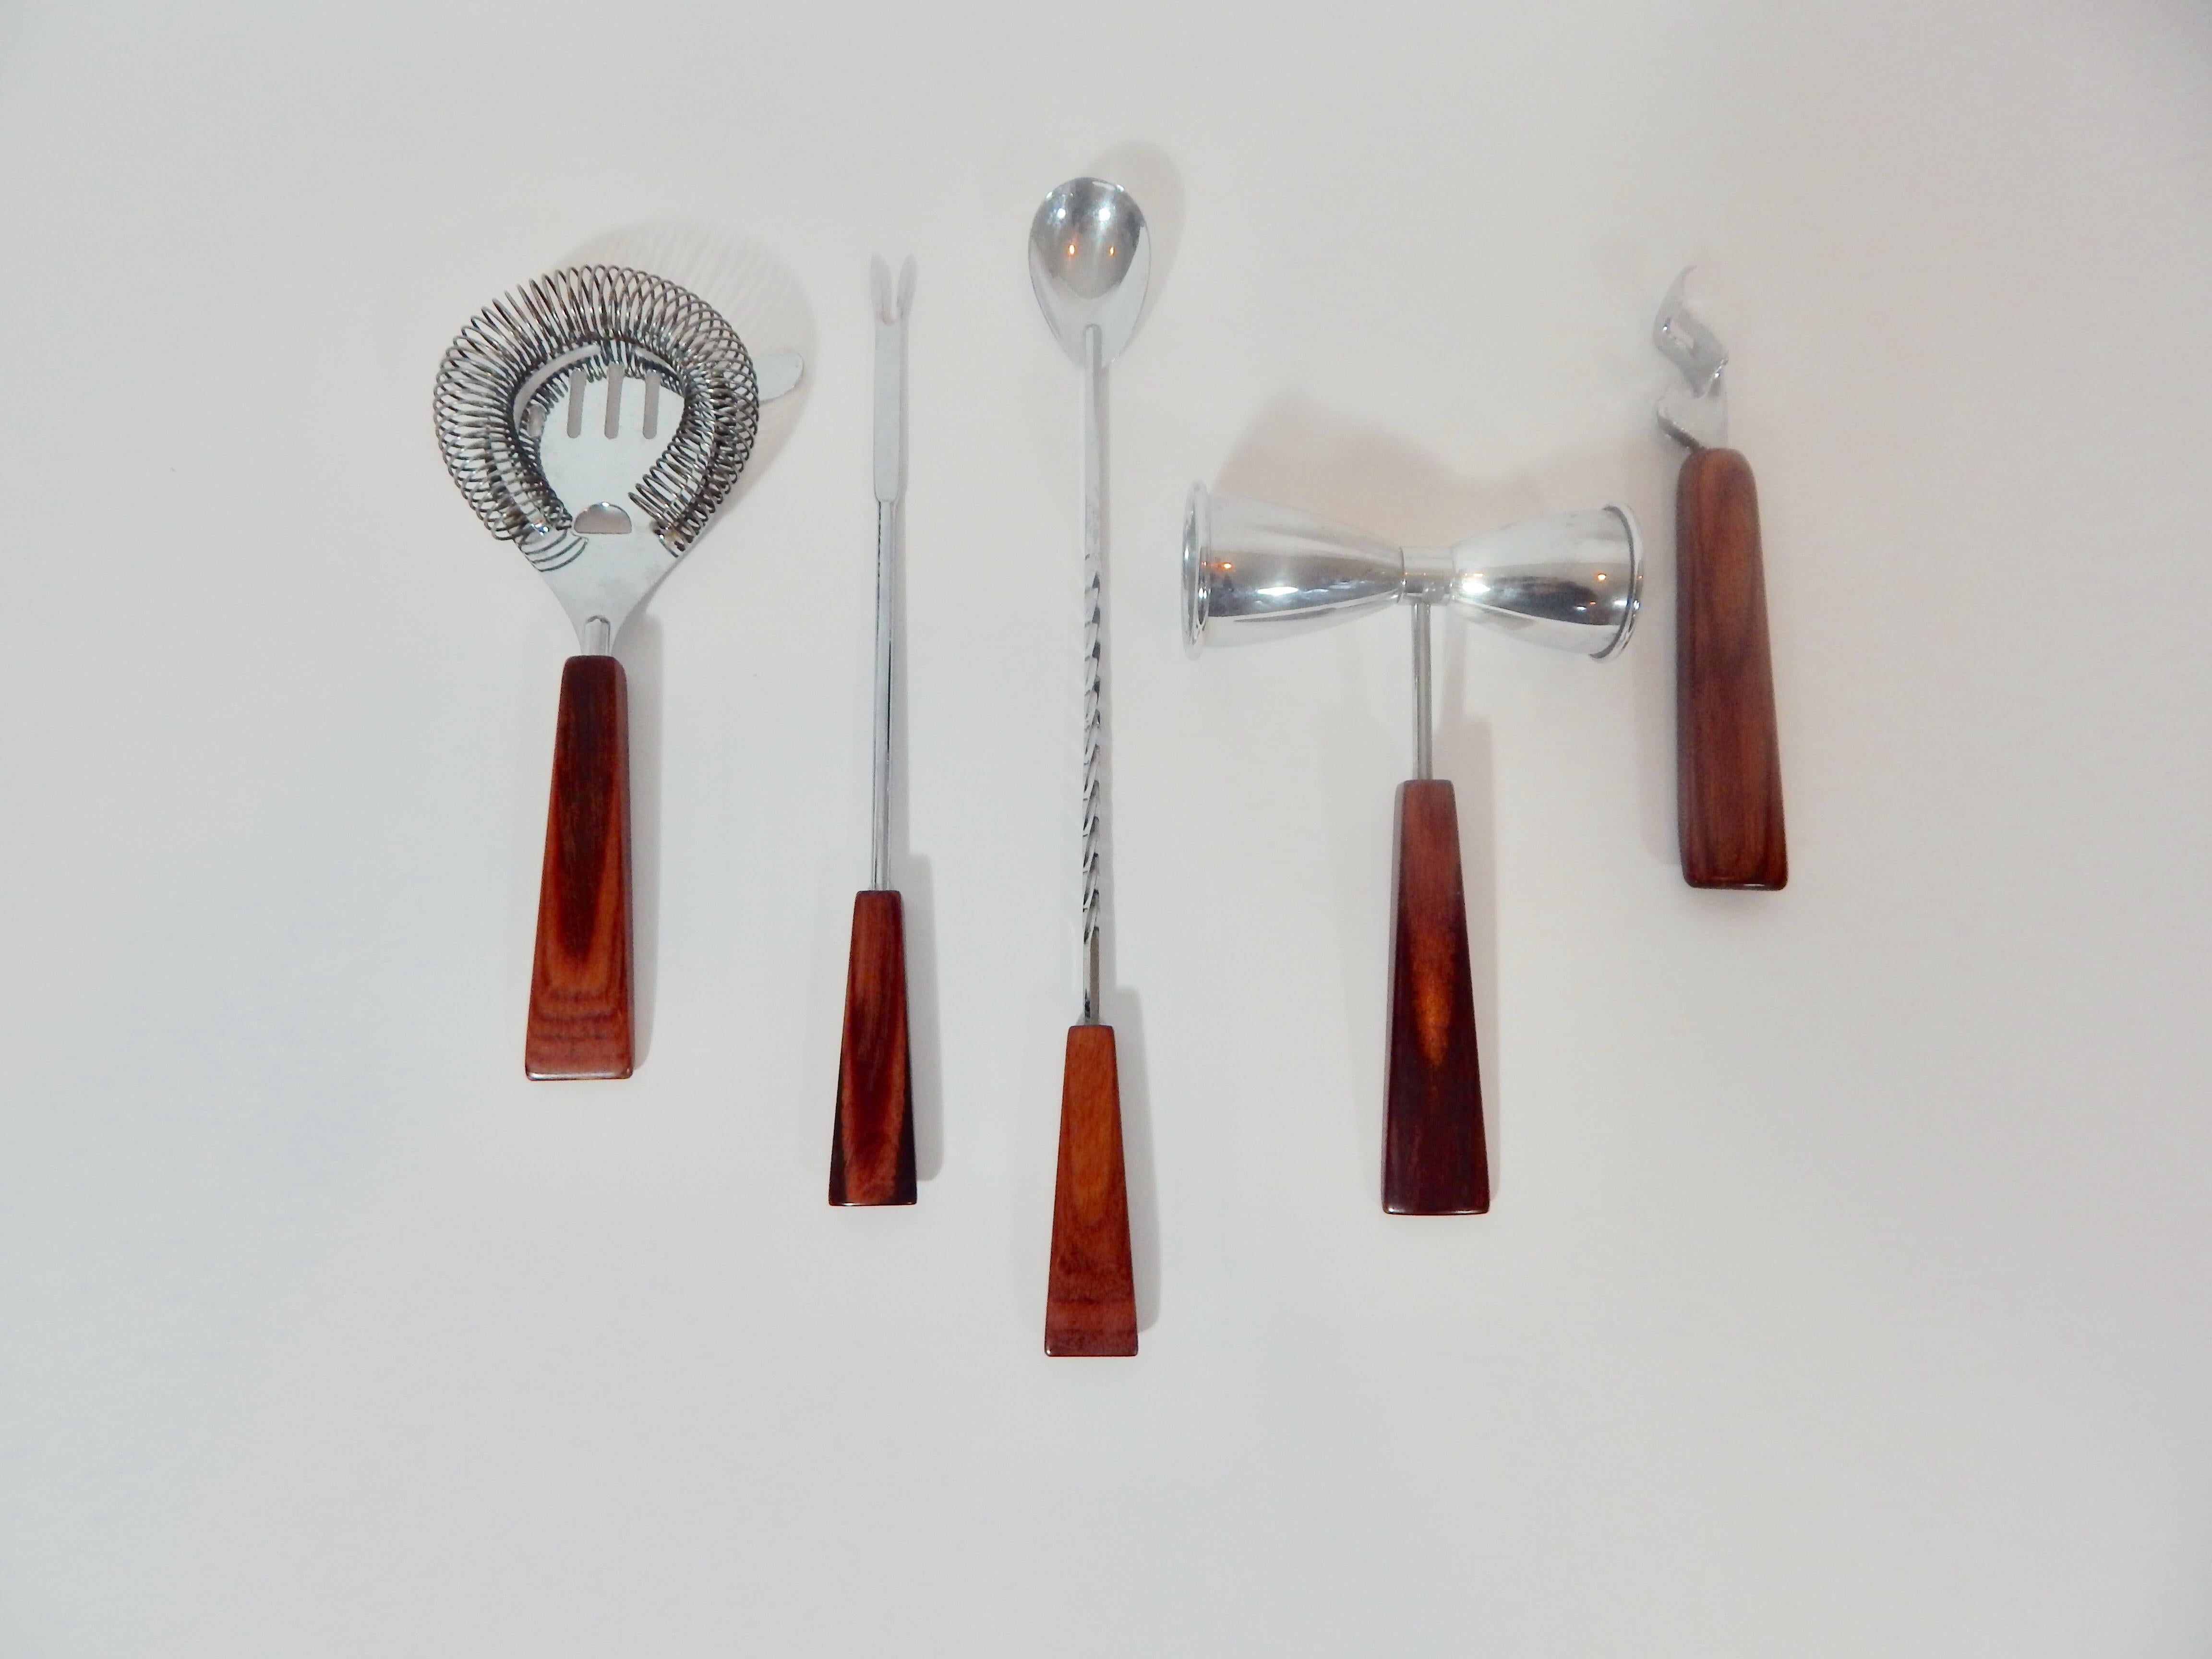 Midcentury 1960s barware utensil set with rosewood handles. 6 pieces set. Excellent condition.
We offer free complimentary domestic priority shipping for this item.